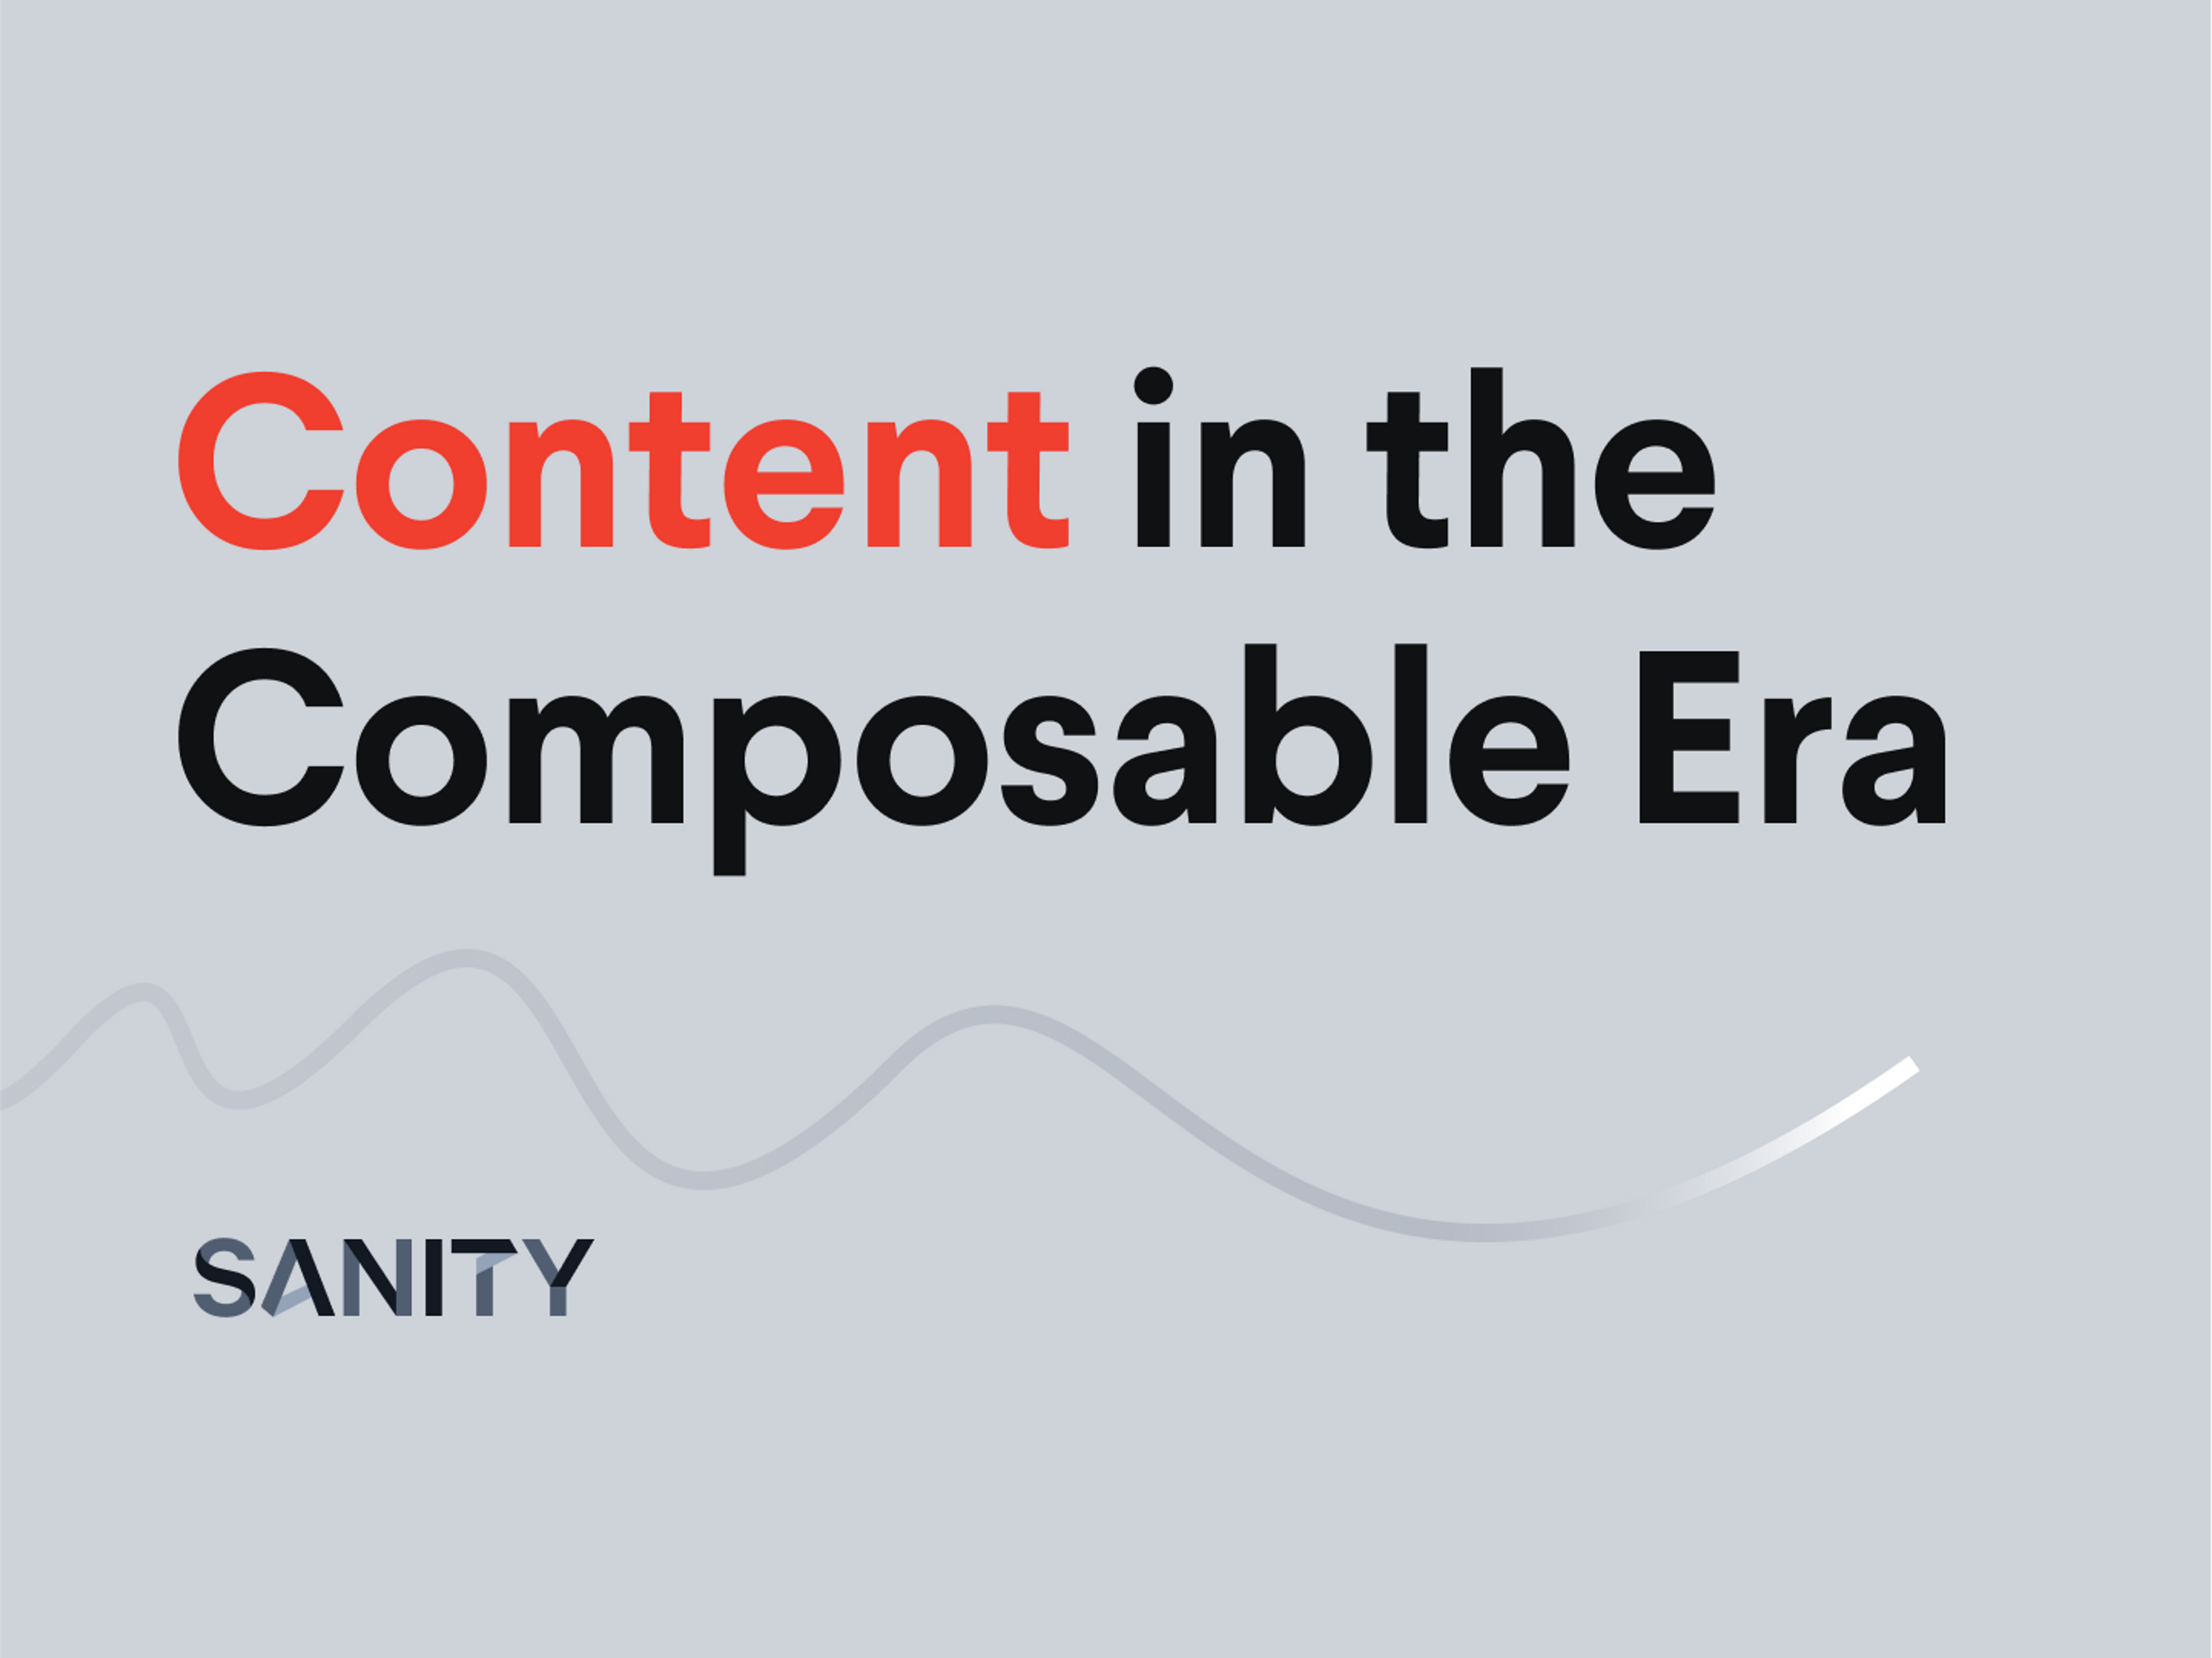 Content in the Composable Era